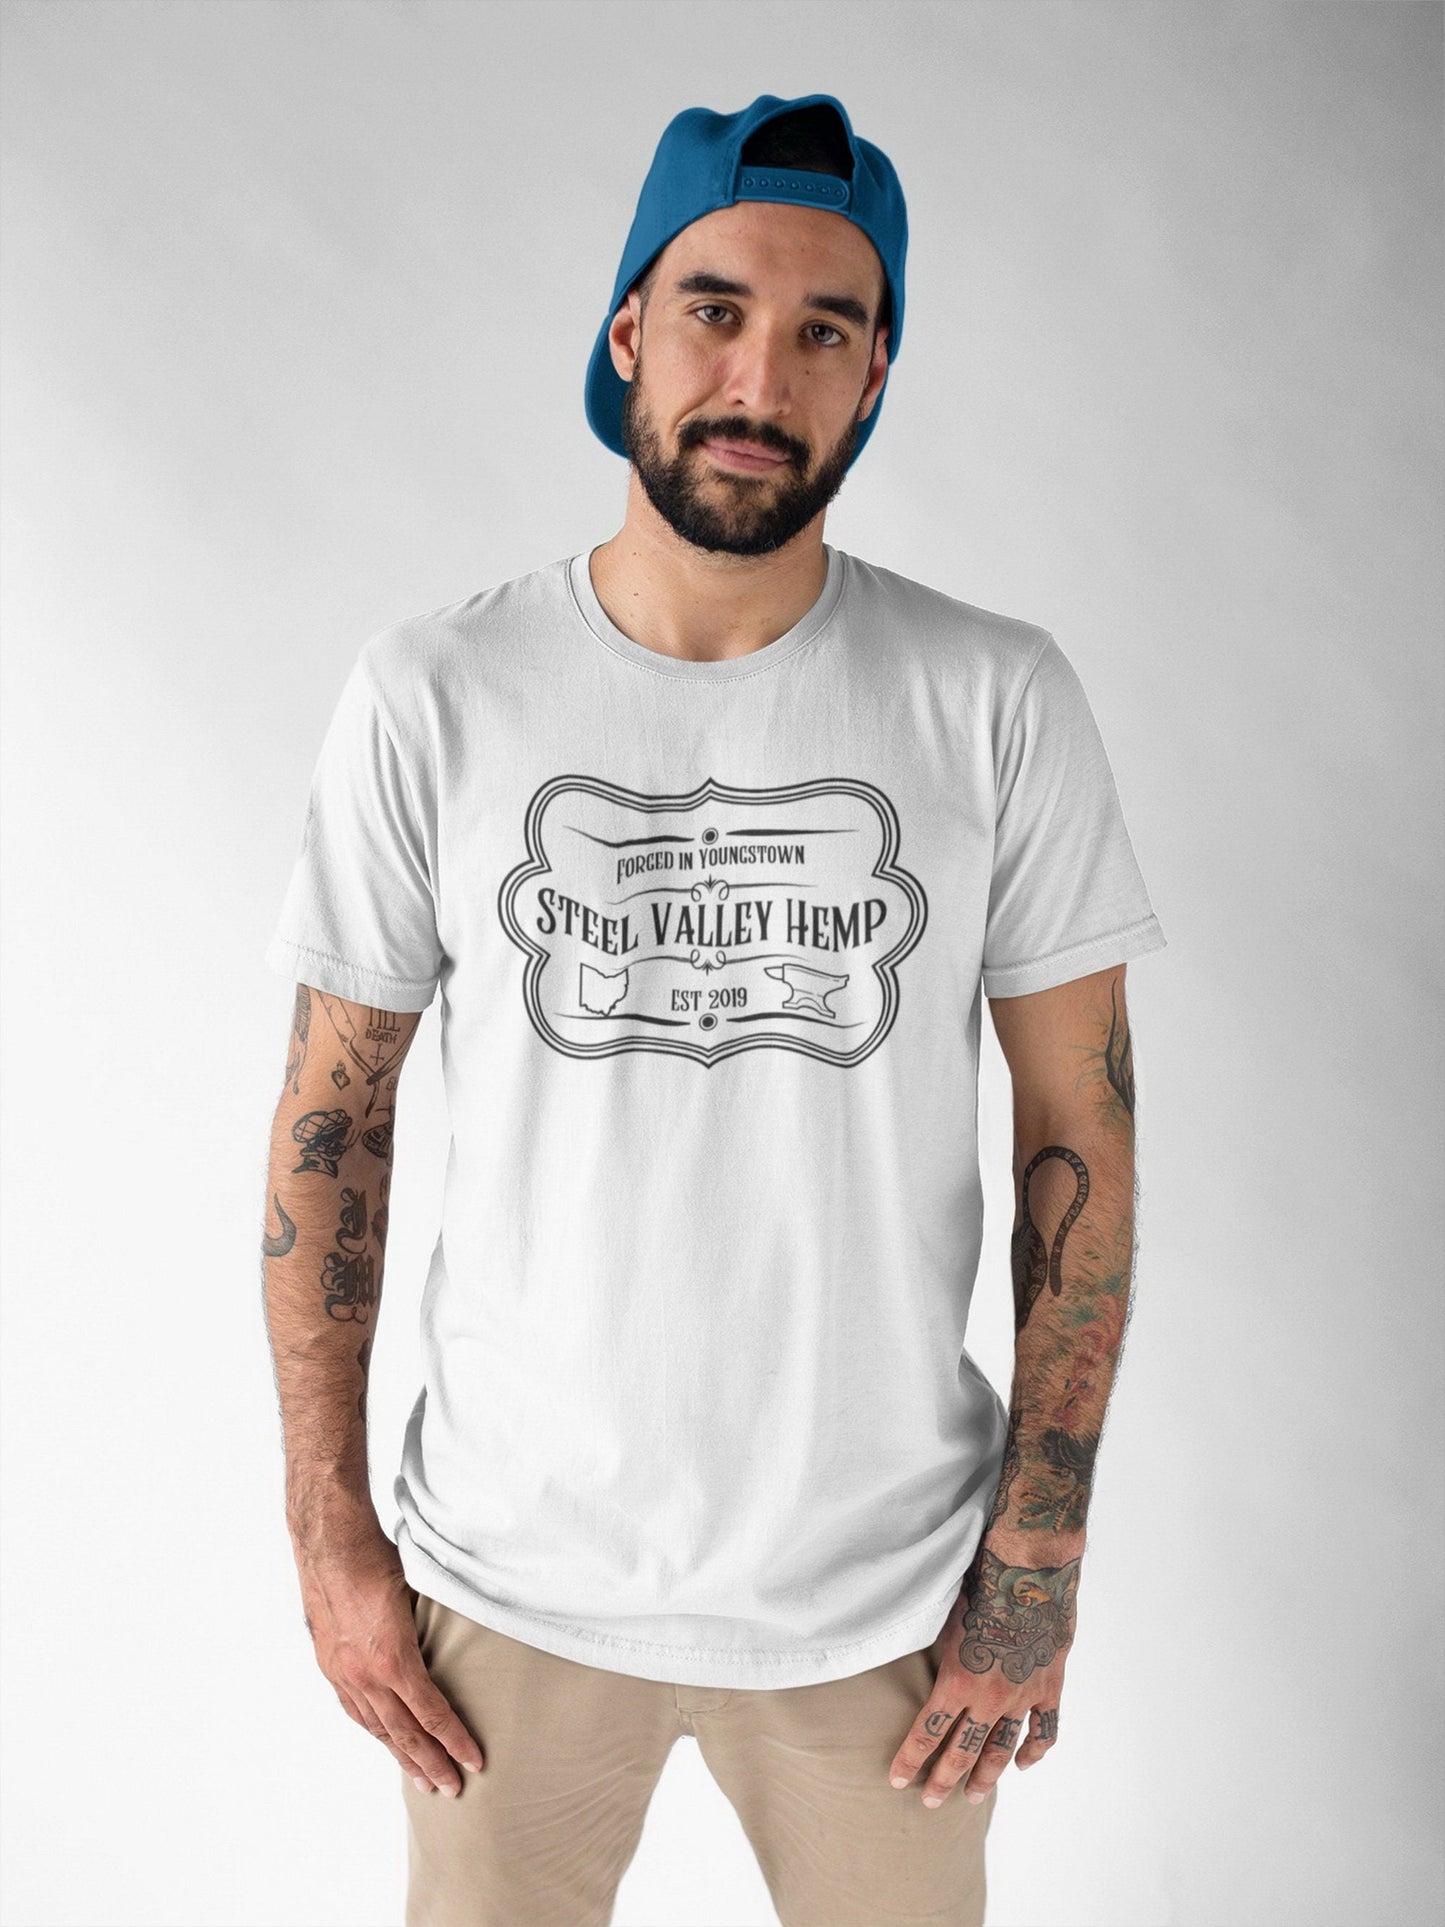 T-Shirt SVH Antique Sign Custom Shirt & Ink Color, Shirts and Tees, T-Shirt, Tees for Men and Women